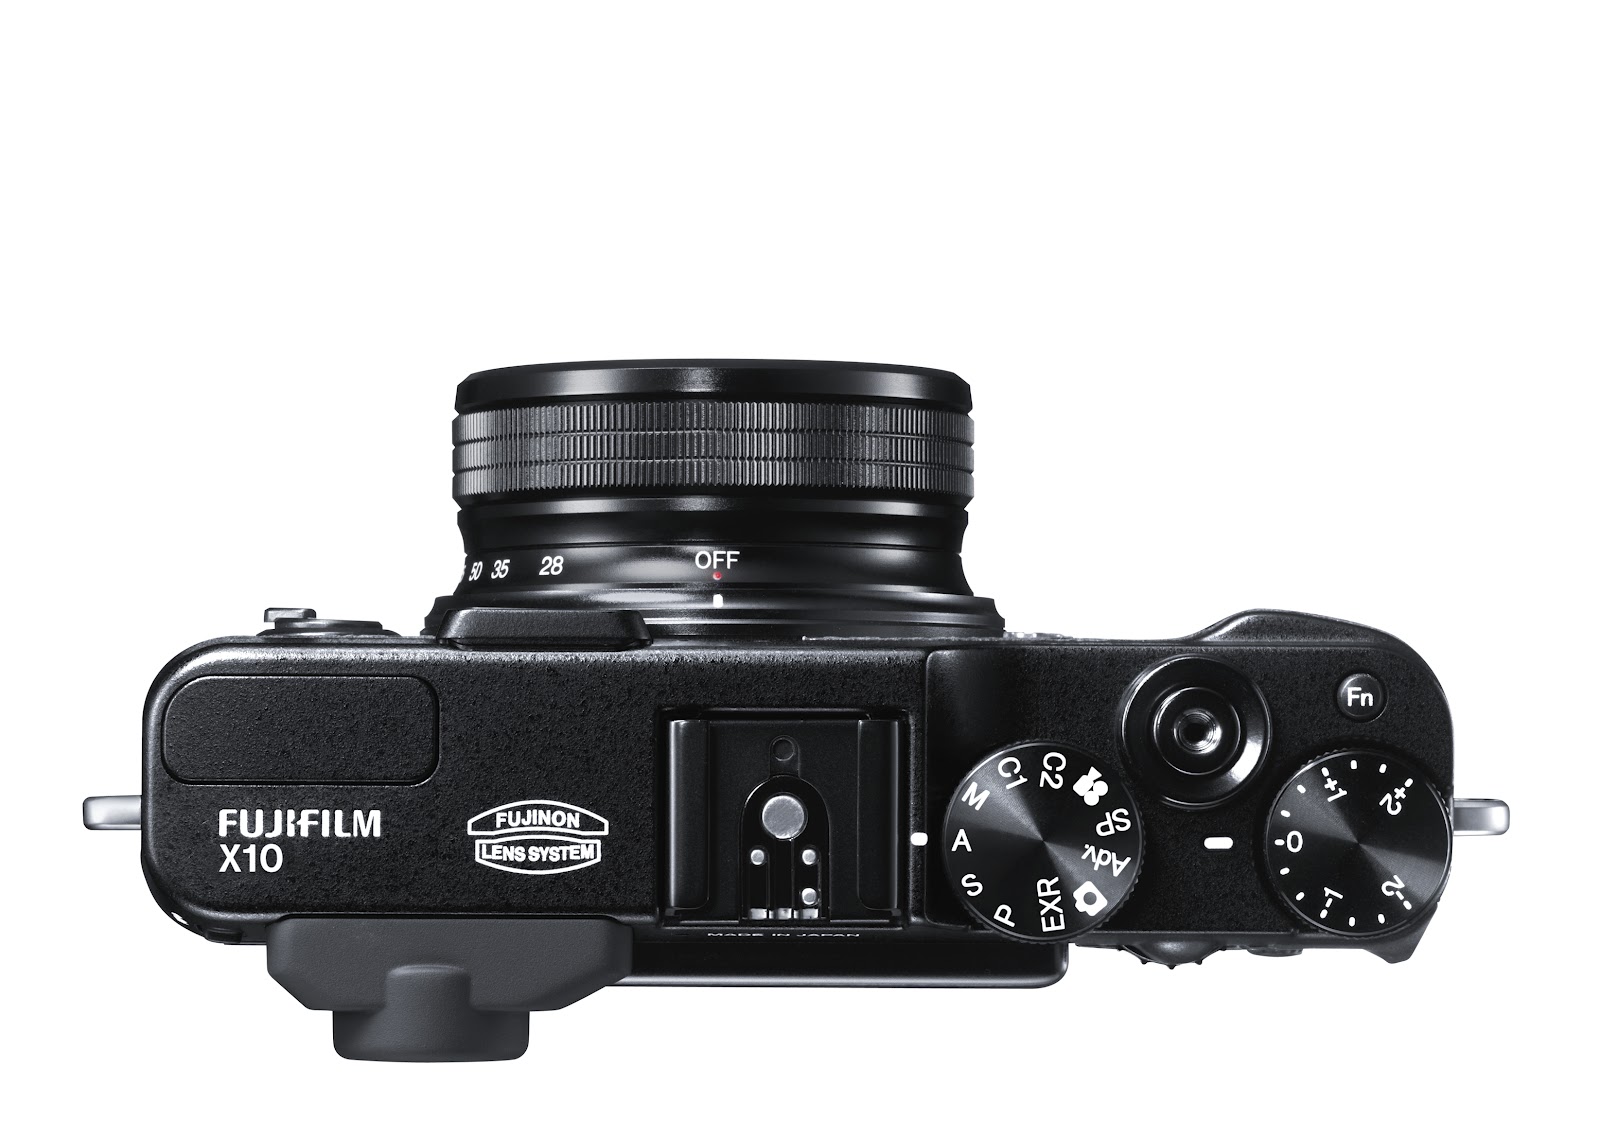 hervorming Extremisten Nucleair PHOTOGRAPHIC CENTRAL: Fujifilm X10 Review